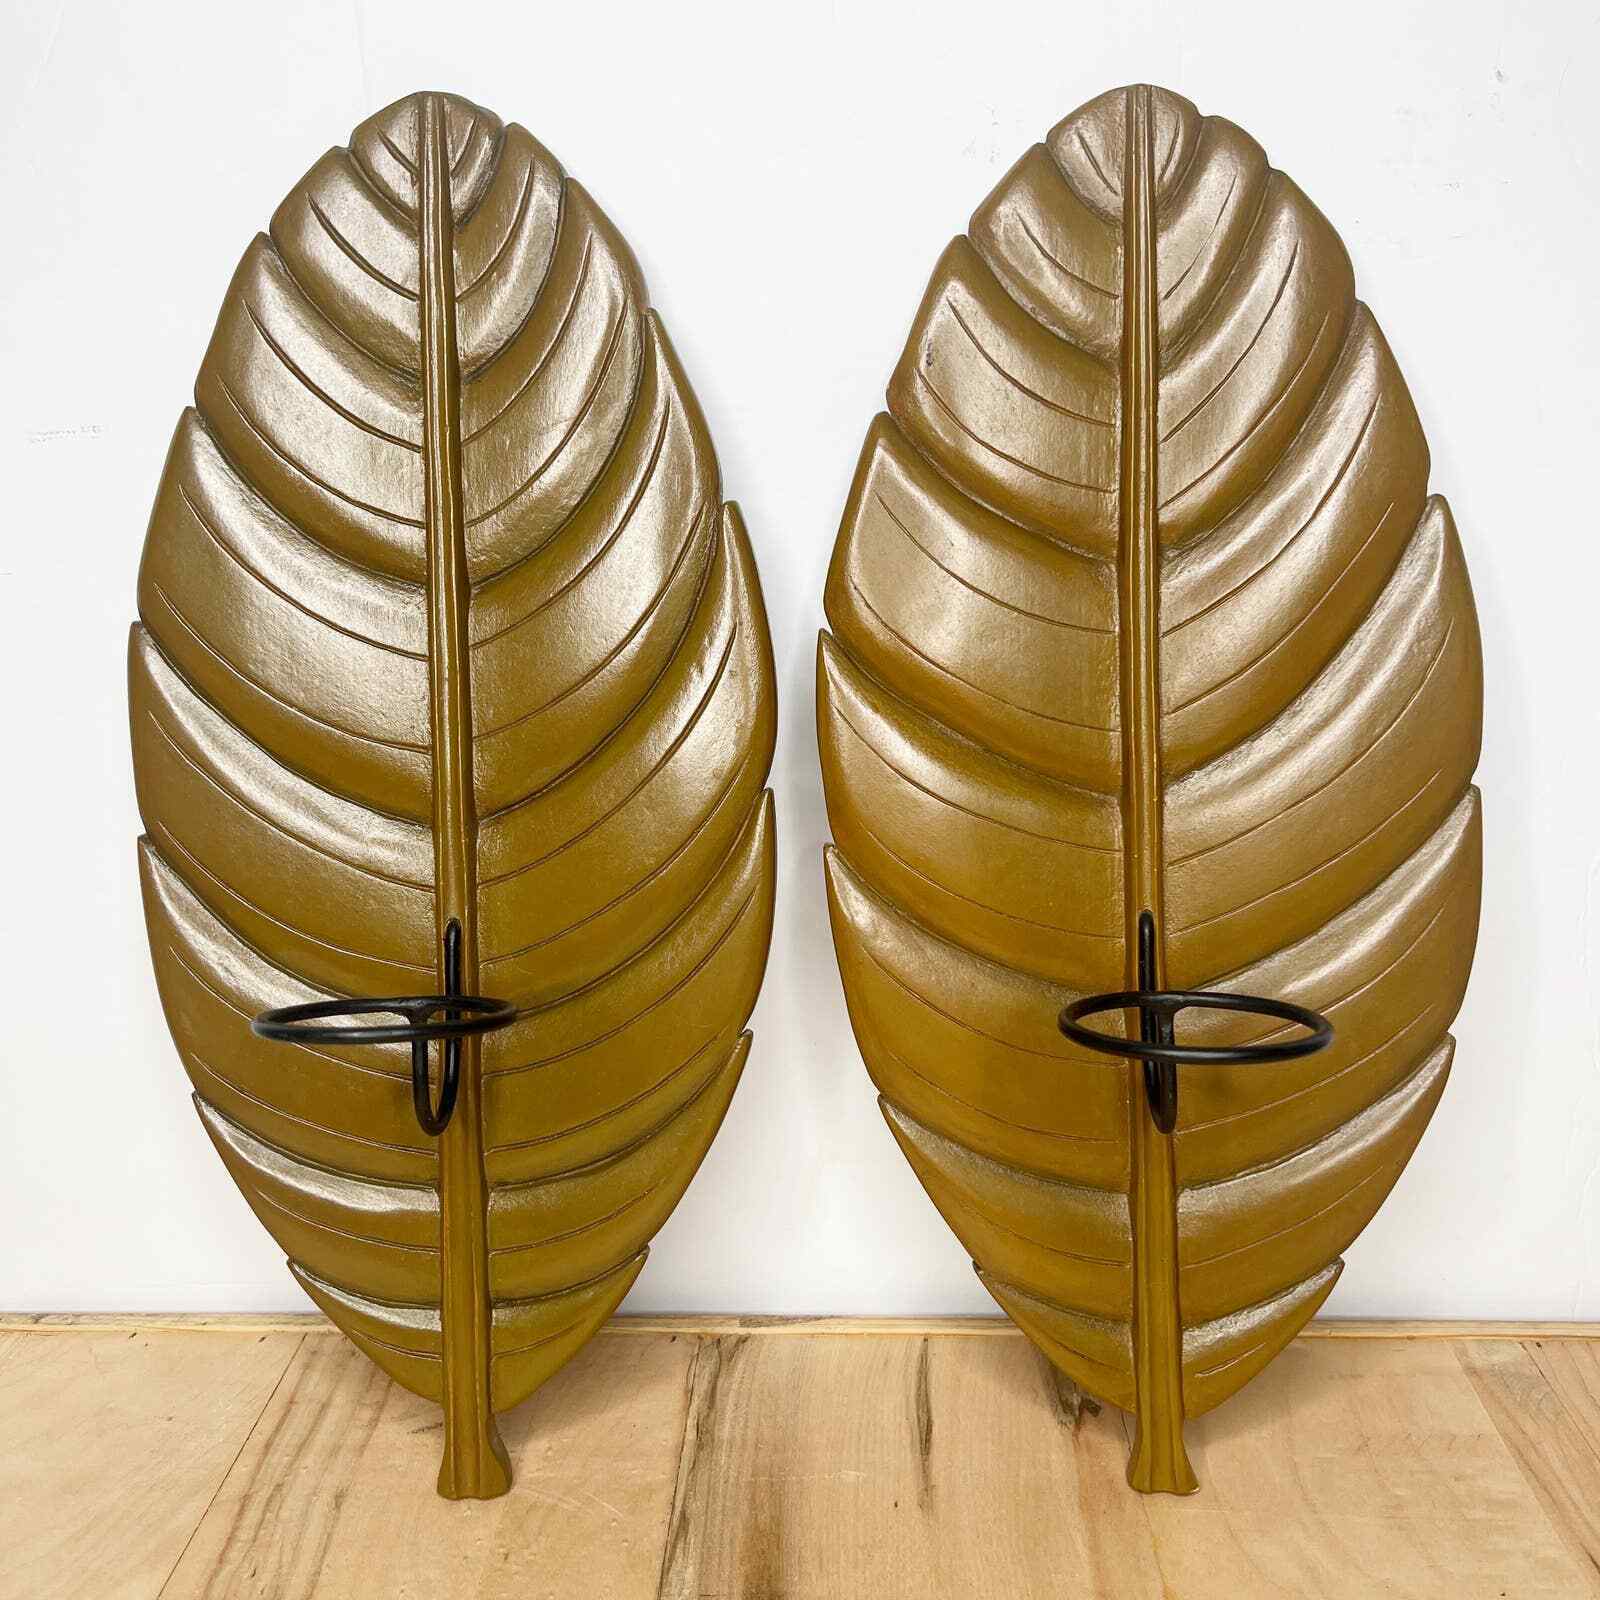 Vintage Retro Banana Leaf Wall Sconces 1960/70s Candle Holders 16” Tall